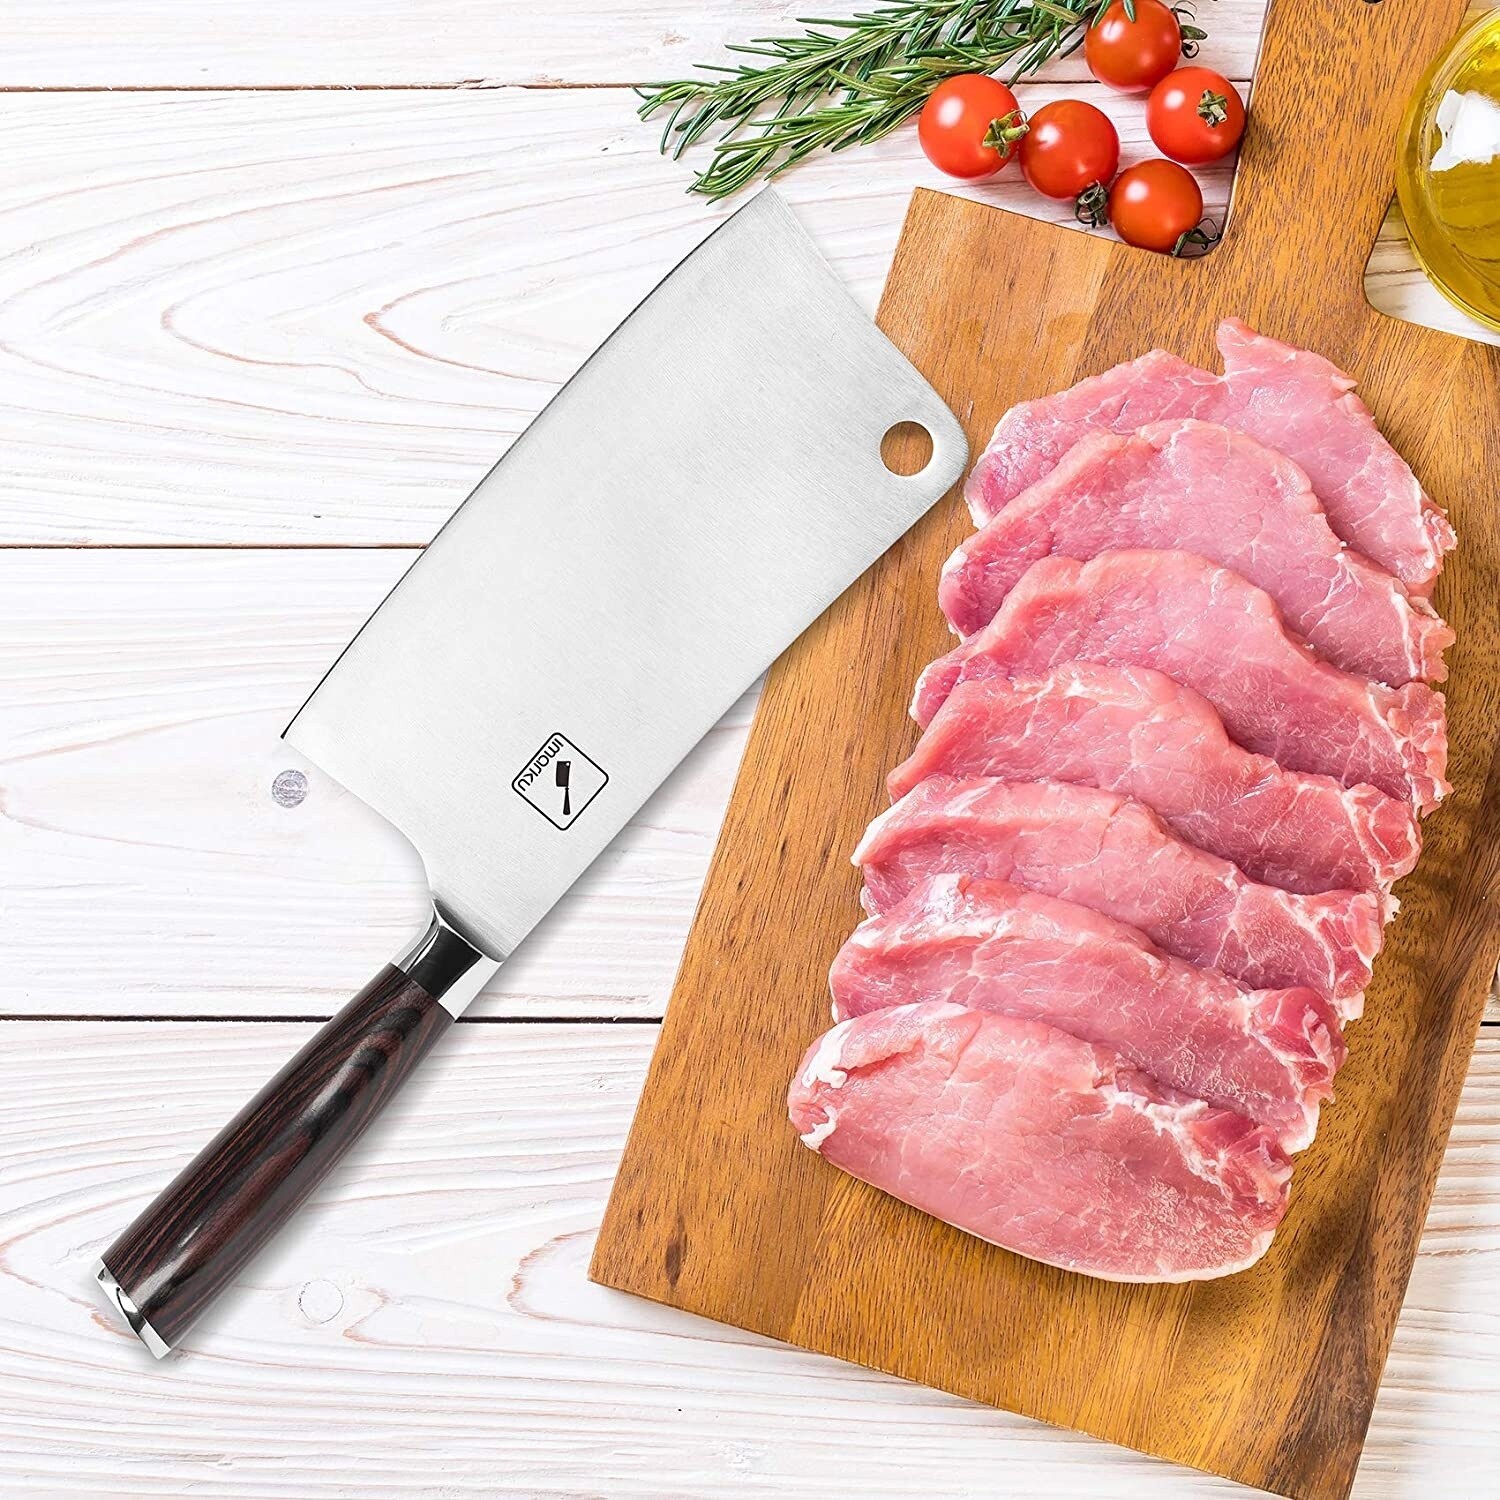 https://ak1.ostkcdn.com/images/products/is/images/direct/d534dc649a7933e4f2d3c4bce526afffac7d101d/imarku-Cleaver-Knife---7-Inch-Meat-Cleaver.jpg